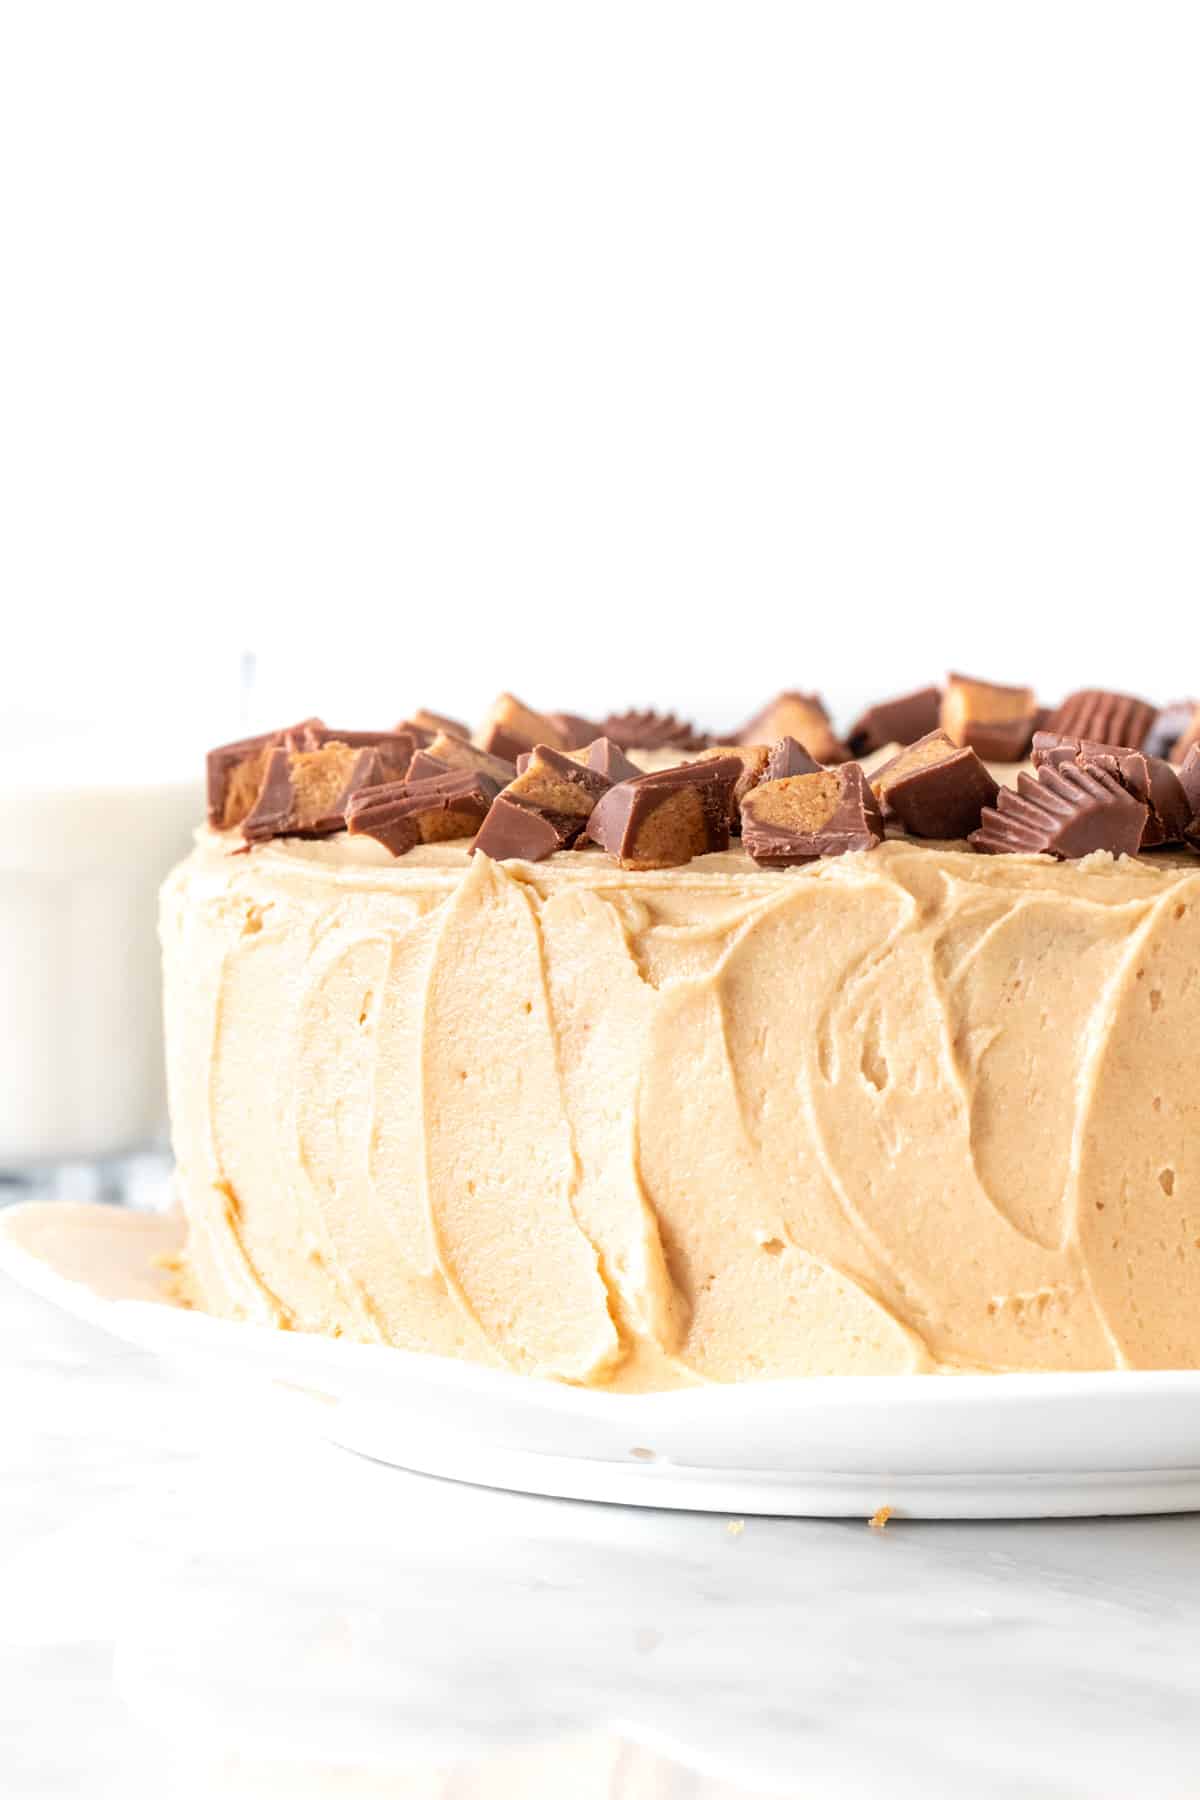 8-inch round peanut butter layer cake, topped with peanut butter cups.